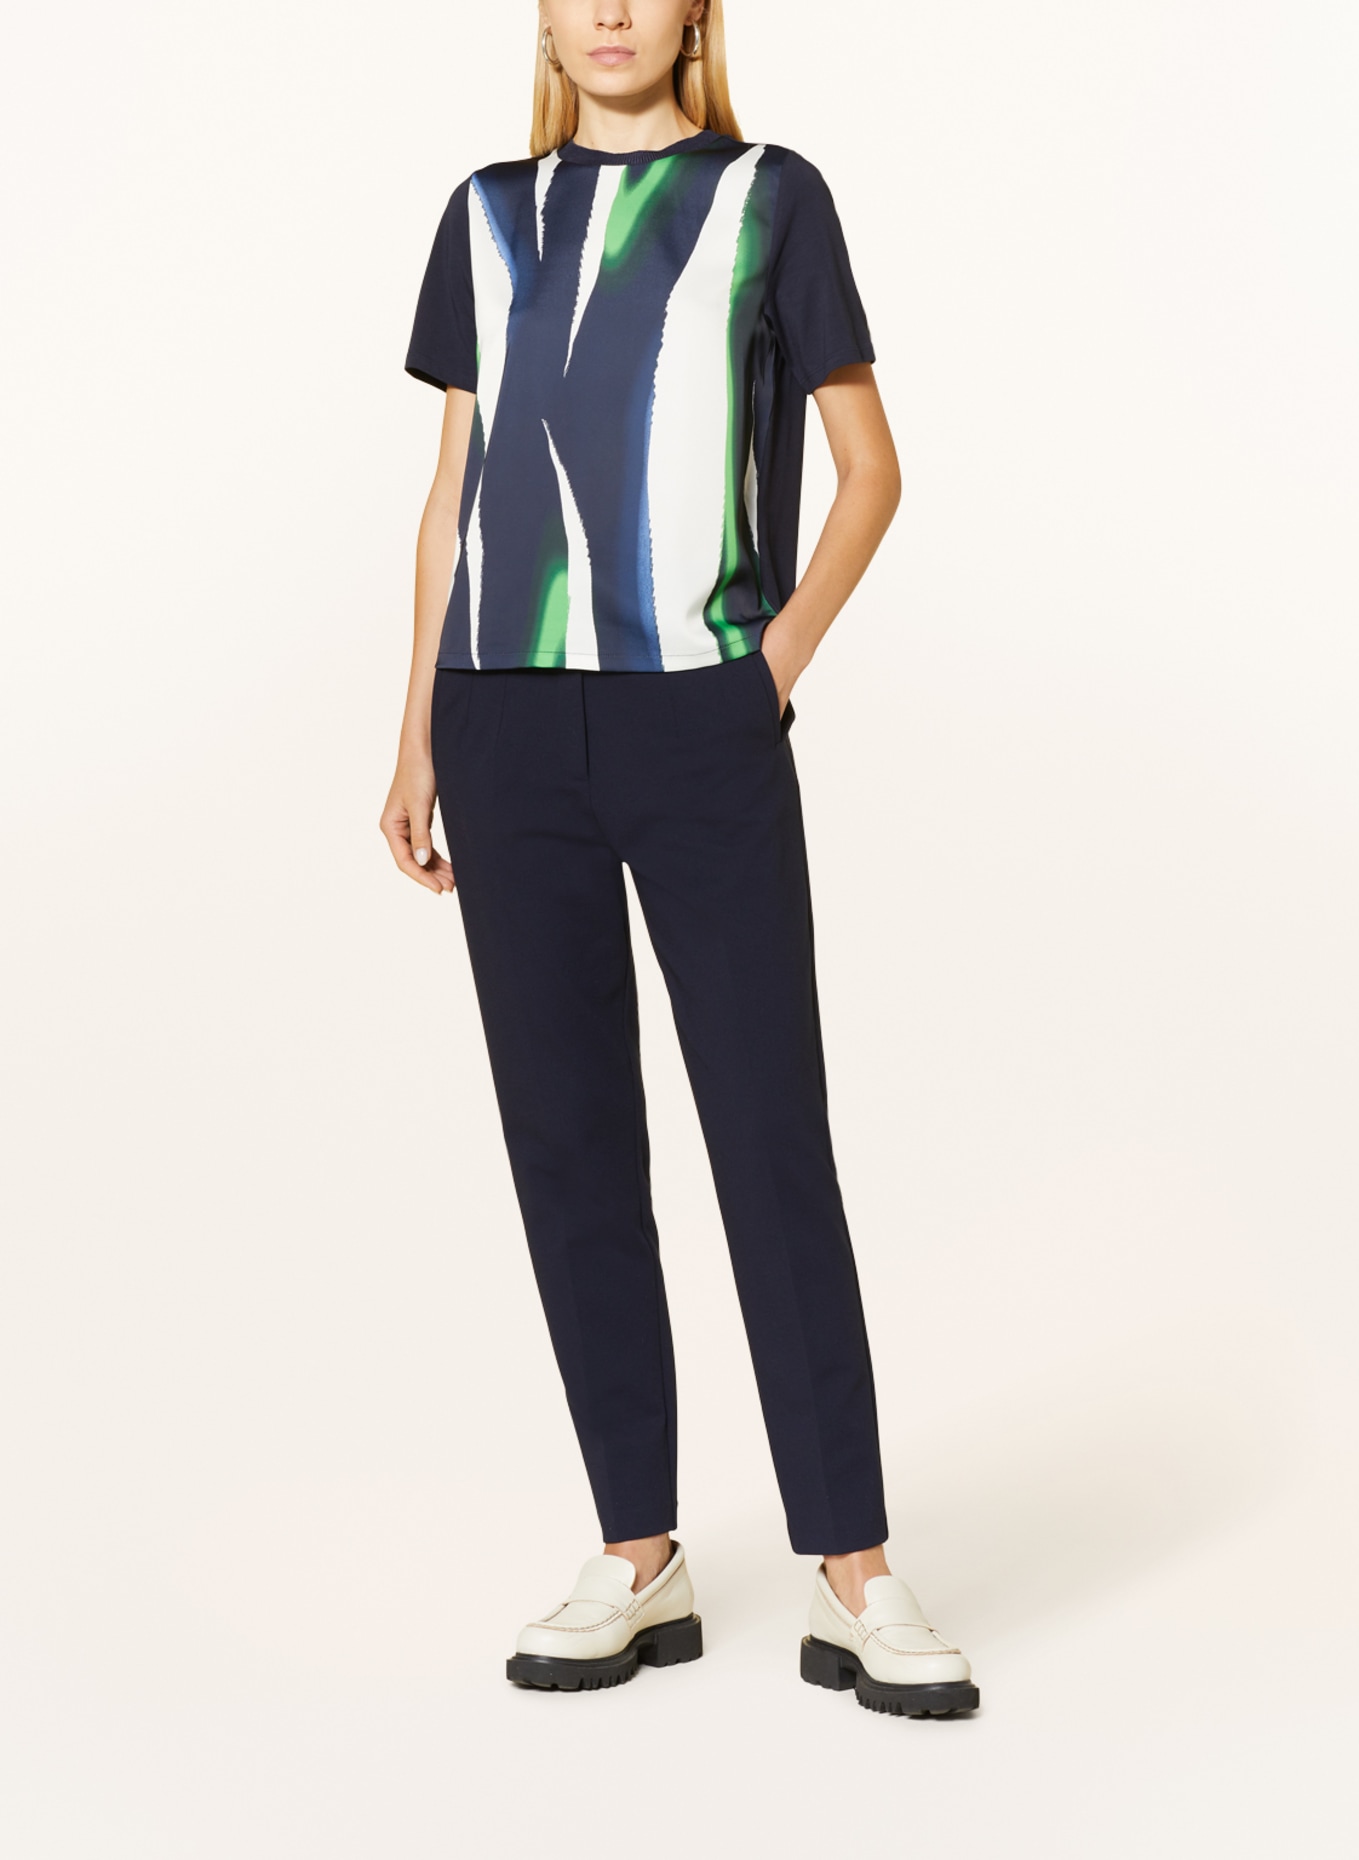 s.Oliver BLACK LABEL Shirt blouse in mixed materials, Color: DARK BLUE/ NEON GREEN/ WHITE (Image 2)